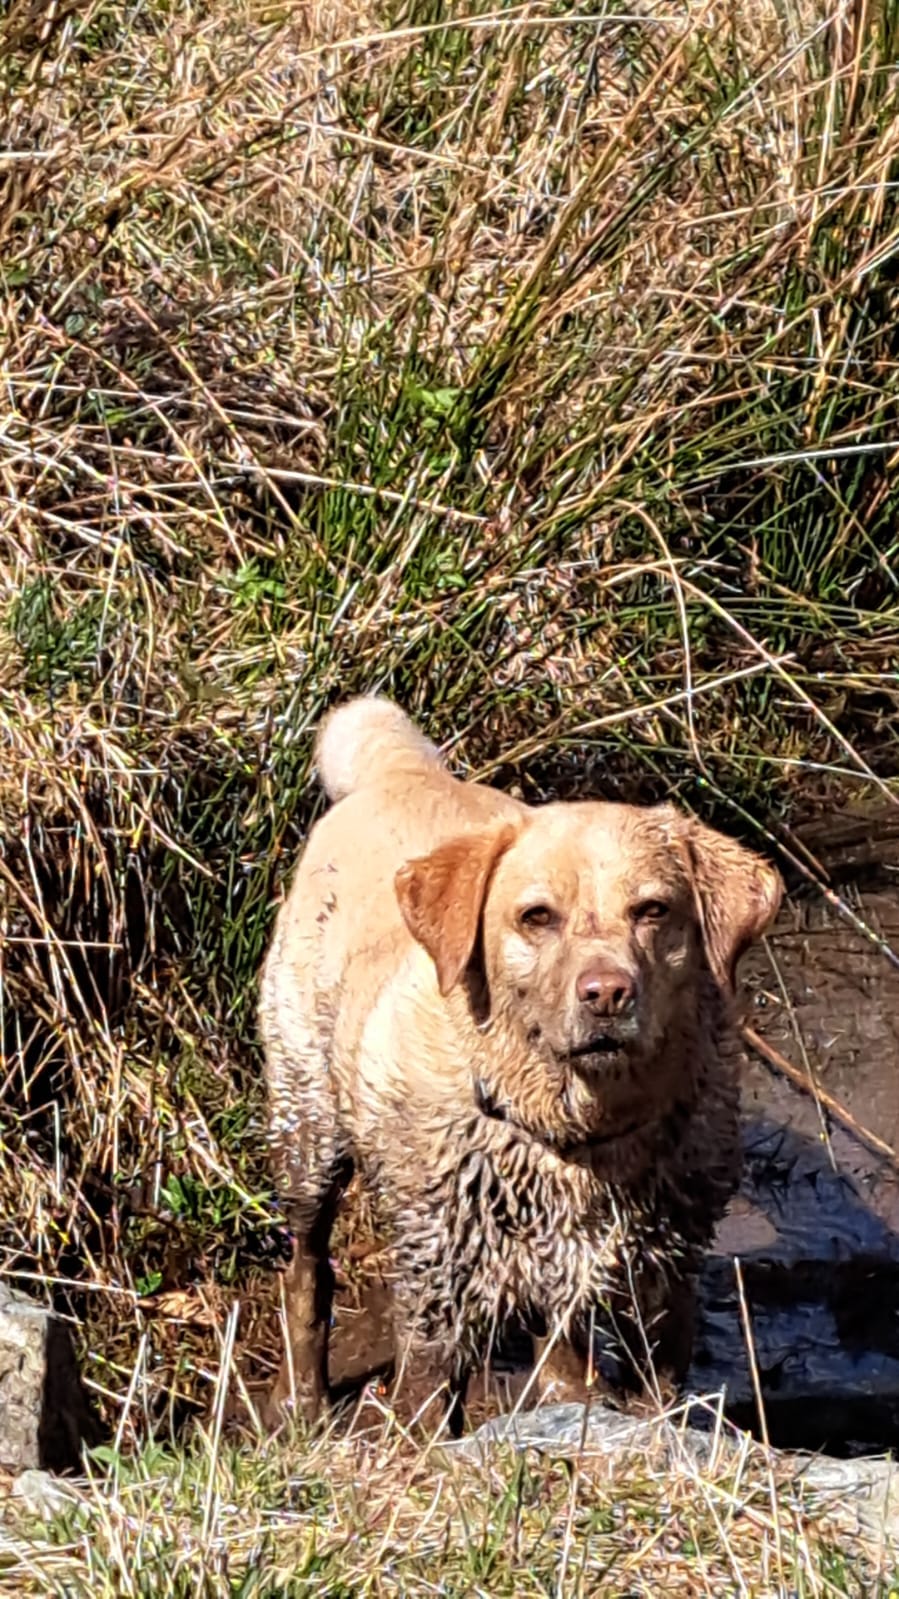 Medium-sized light brown dog standing in deep mud puddle, legs covered in mud